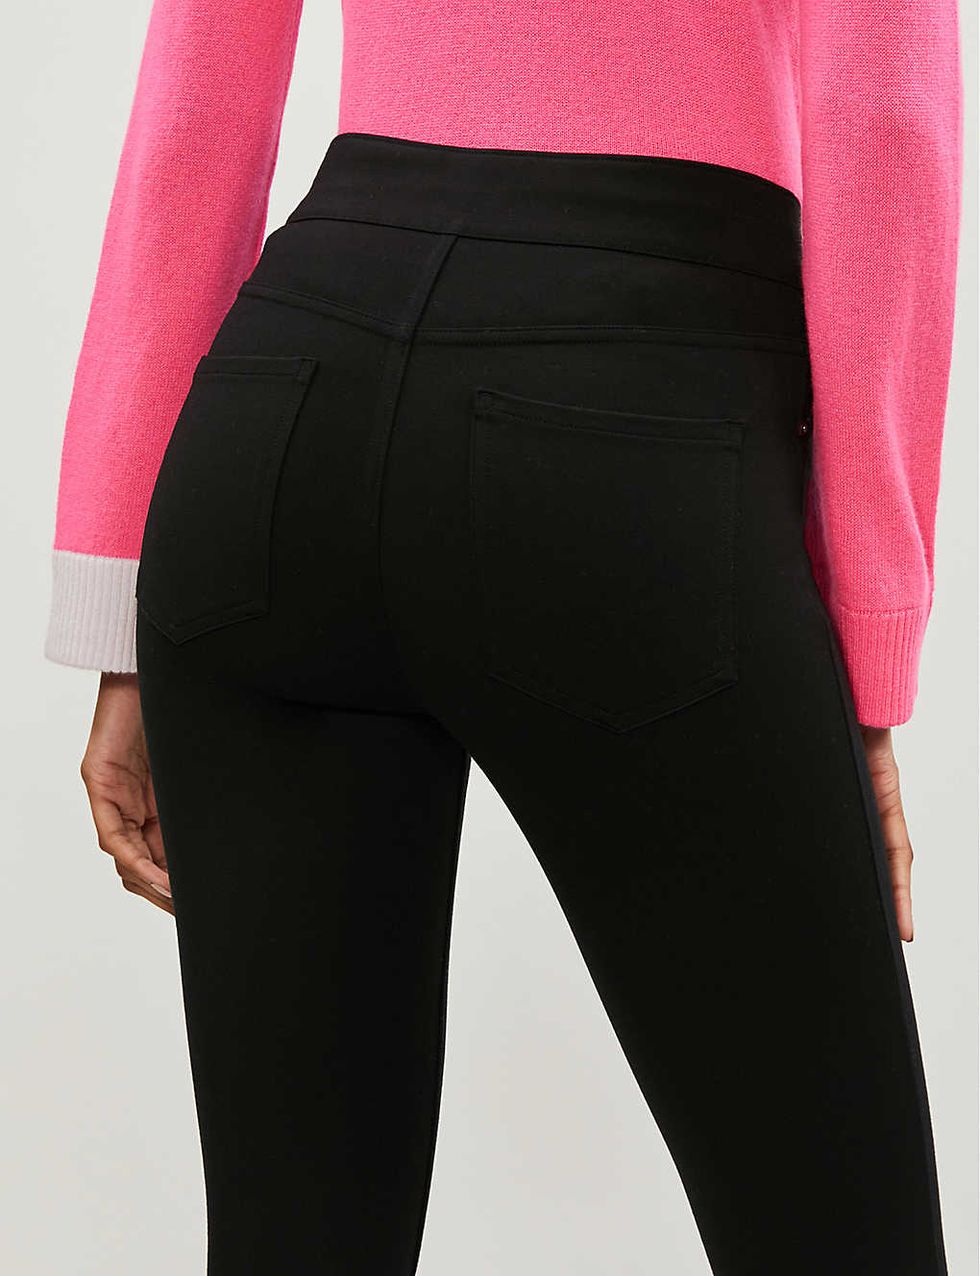 Spanx trousers - Spanx launches The Perfect Black Pant trousers